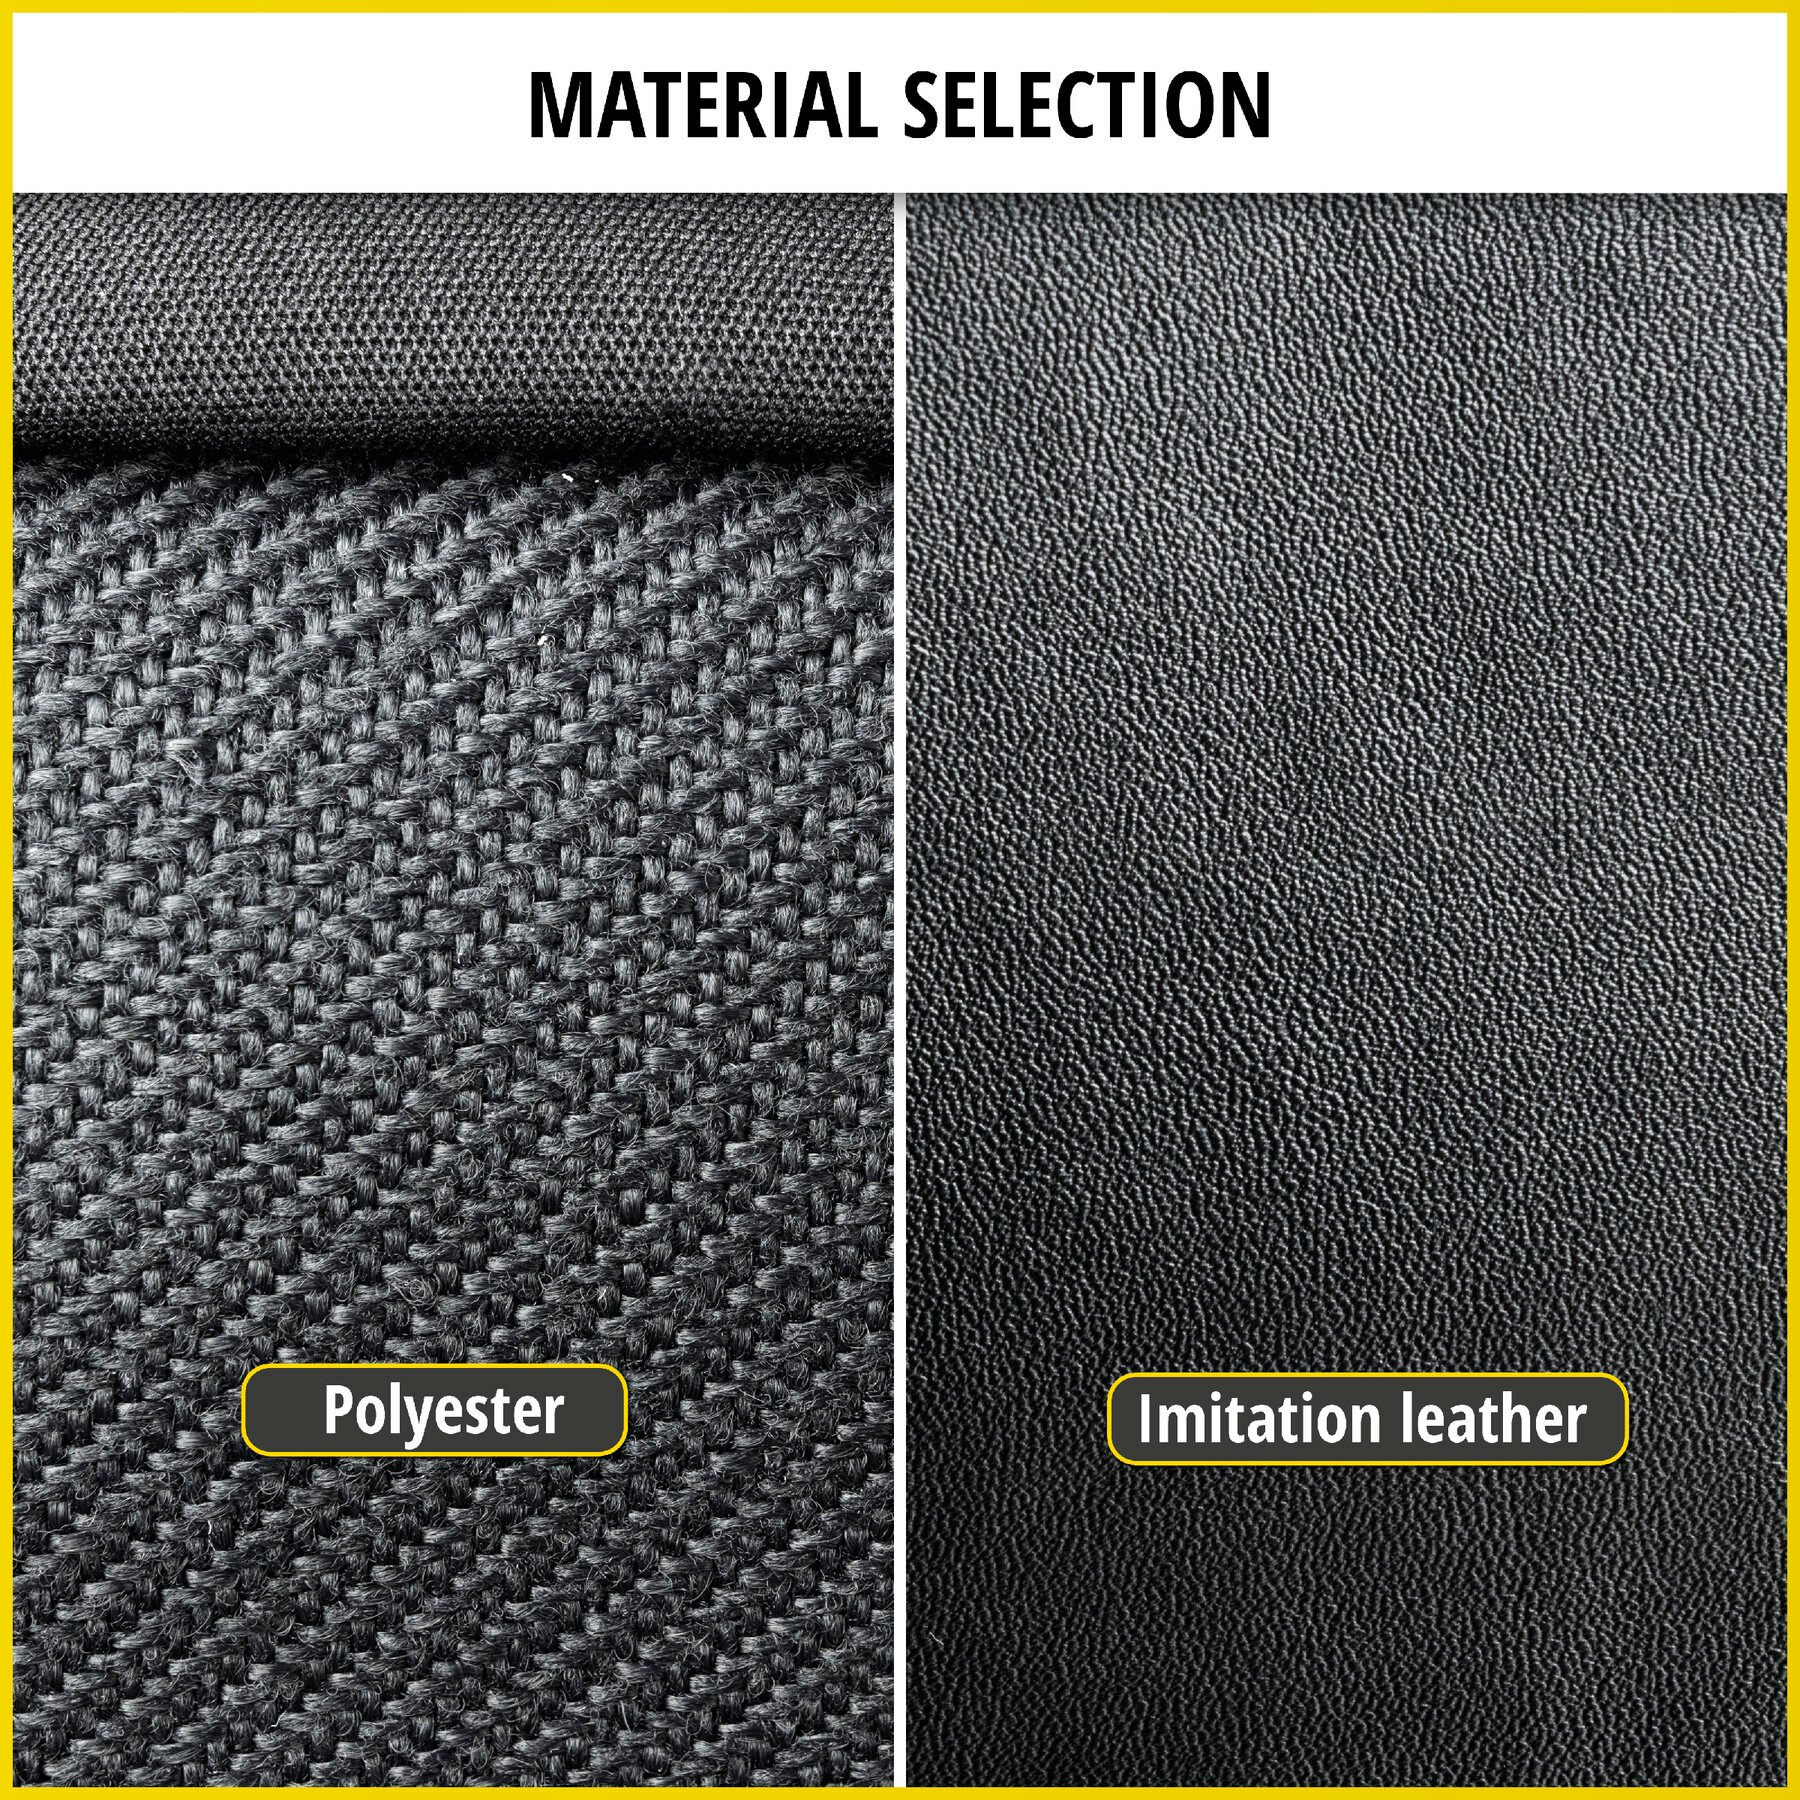 Seat cover made of imitation leather for VW T6, single seat cover front